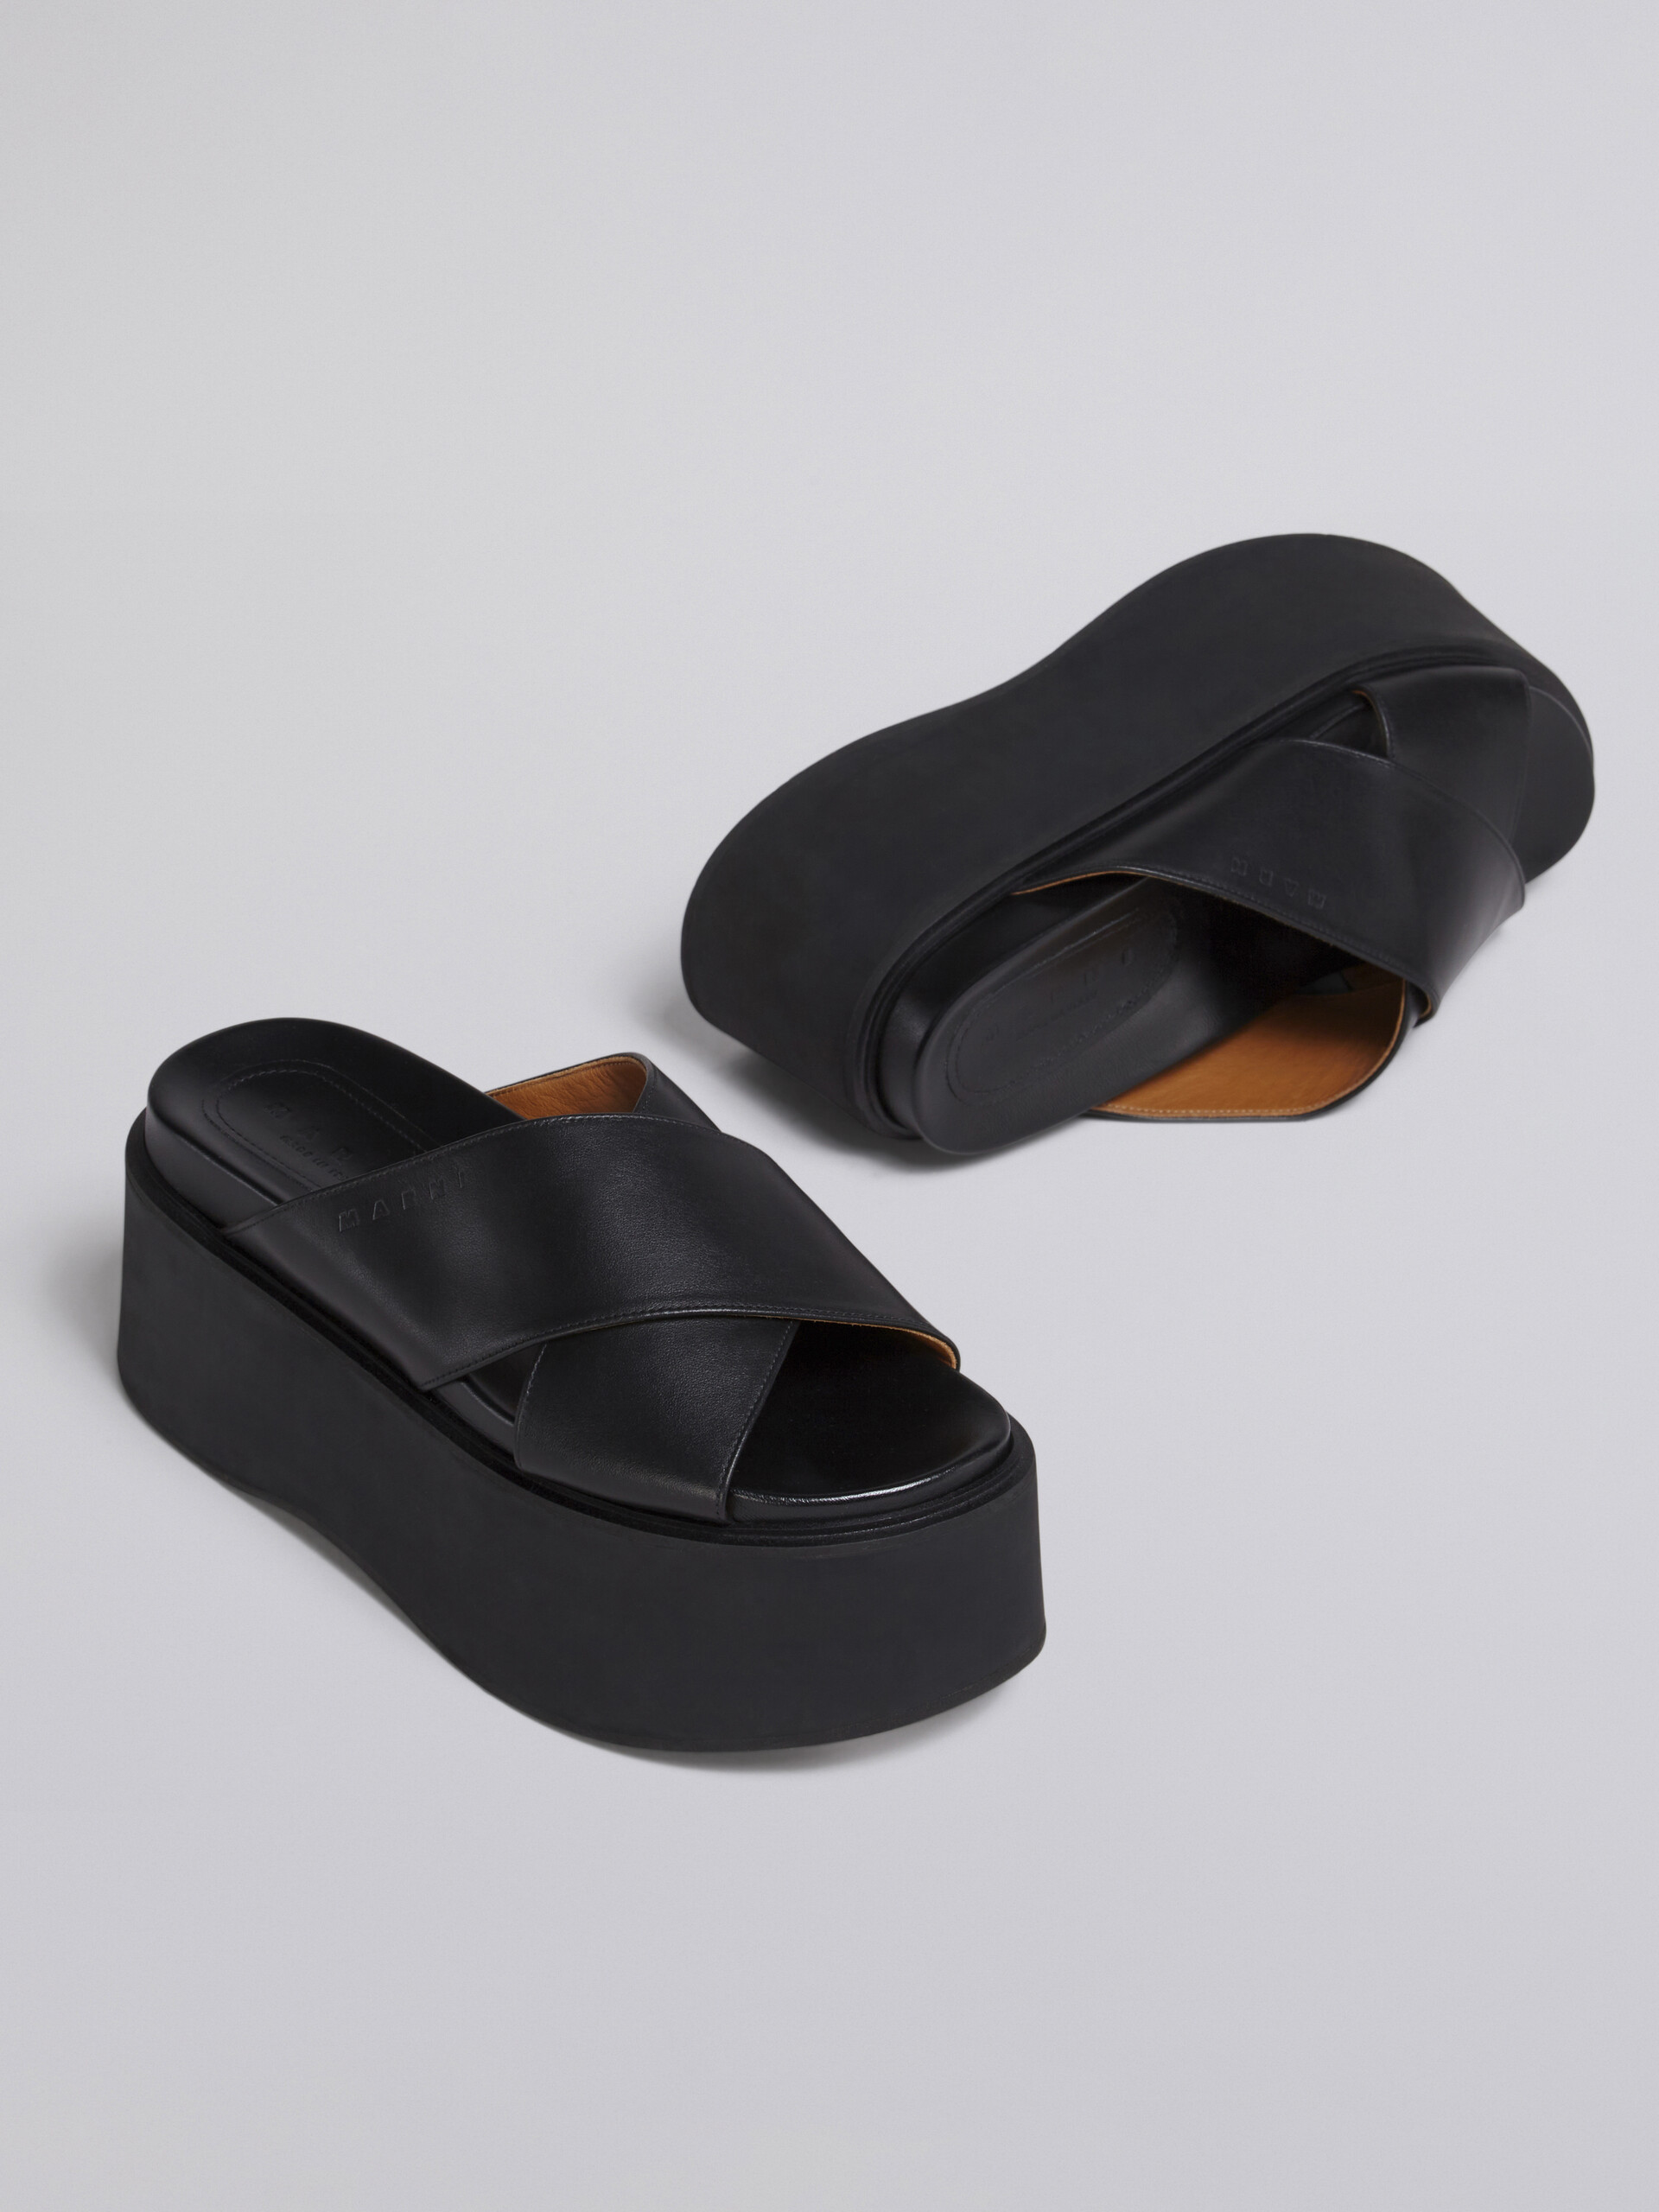 Criss-cross wedge in black calf leather - Sandals - Image 5